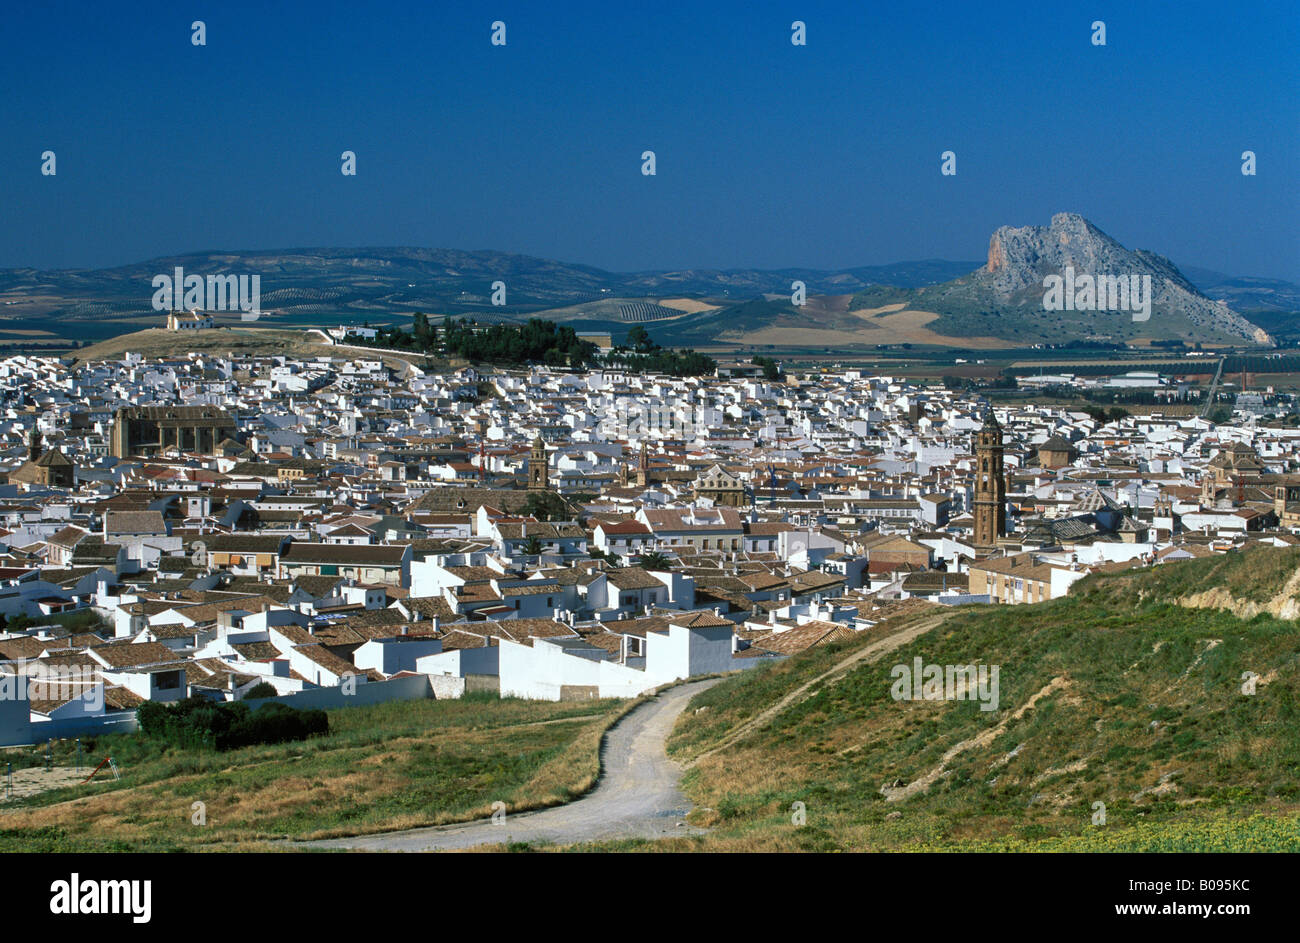 Town of Antequera, Málaga Province, Andalusia, Spain Stock Photo